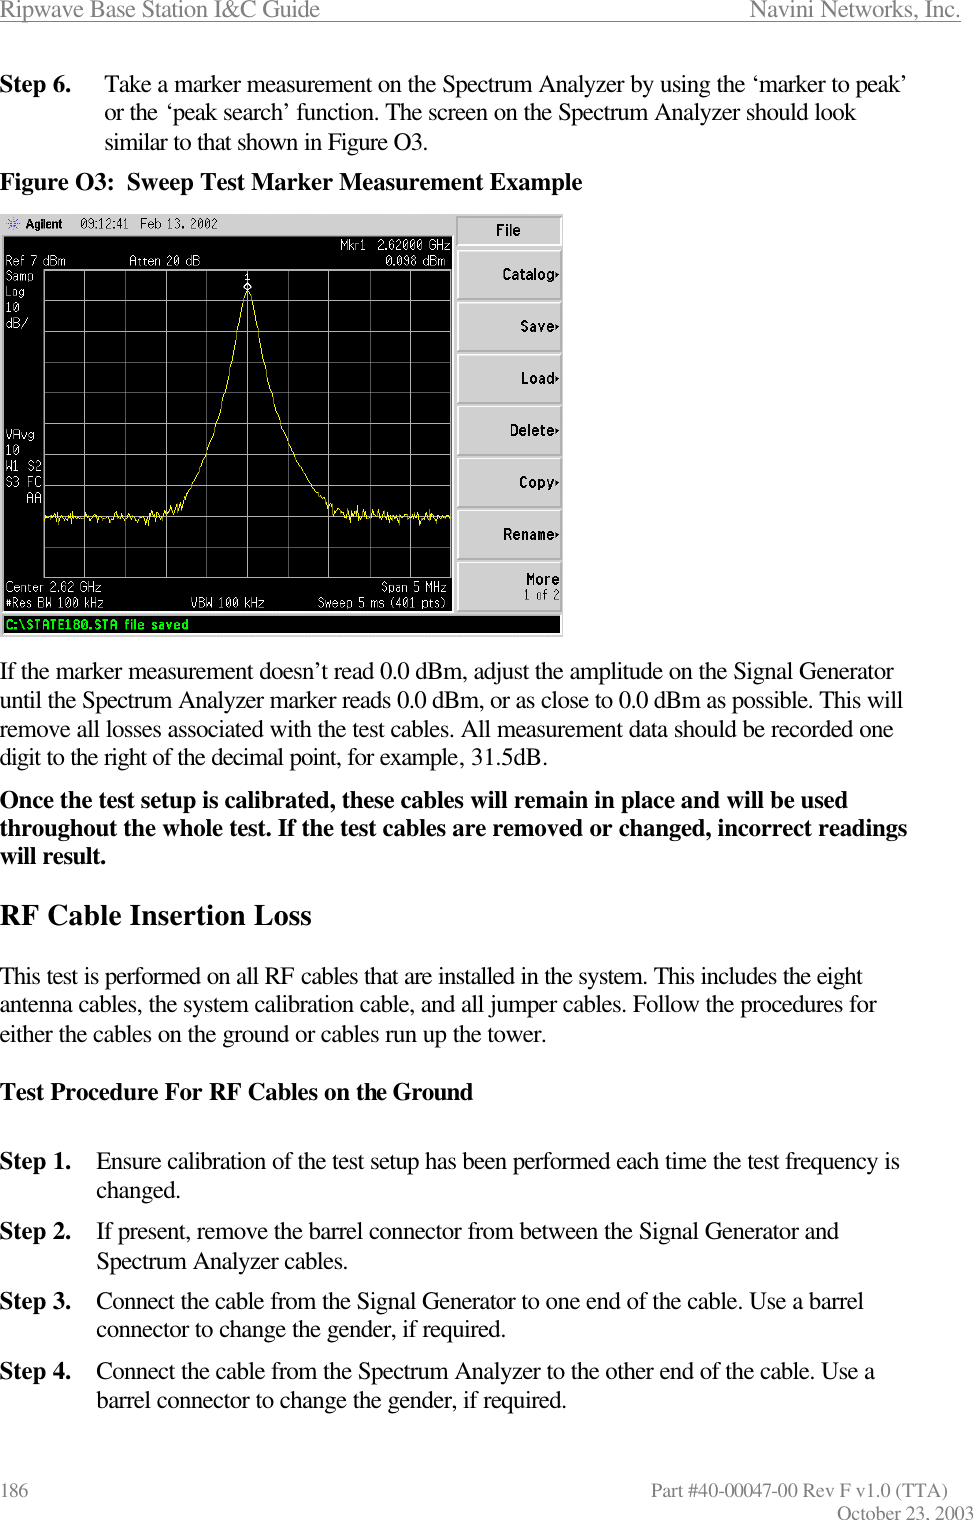 Ripwave Base Station I&amp;C Guide                      Navini Networks, Inc. 186                   Part #40-00047-00 Rev F v1.0 (TTA) October 23, 2003 Step 6. Take a marker measurement on the Spectrum Analyzer by using the ‘marker to peak’ or the ‘peak search’ function. The screen on the Spectrum Analyzer should look similar to that shown in Figure O3. Figure O3:  Sweep Test Marker Measurement Example                 If the marker measurement doesn’t read 0.0 dBm, adjust the amplitude on the Signal Generator until the Spectrum Analyzer marker reads 0.0 dBm, or as close to 0.0 dBm as possible. This will remove all losses associated with the test cables. All measurement data should be recorded one digit to the right of the decimal point, for example, 31.5dB. Once the test setup is calibrated, these cables will remain in place and will be used throughout the whole test. If the test cables are removed or changed, incorrect readings will result.  RF Cable Insertion Loss  This test is performed on all RF cables that are installed in the system. This includes the eight antenna cables, the system calibration cable, and all jumper cables. Follow the procedures for either the cables on the ground or cables run up the tower.  Test Procedure For RF Cables on the Ground  Step 1. Ensure calibration of the test setup has been performed each time the test frequency is changed. Step 2. If present, remove the barrel connector from between the Signal Generator and Spectrum Analyzer cables. Step 3. Connect the cable from the Signal Generator to one end of the cable. Use a barrel connector to change the gender, if required.  Step 4. Connect the cable from the Spectrum Analyzer to the other end of the cable. Use a barrel connector to change the gender, if required. 